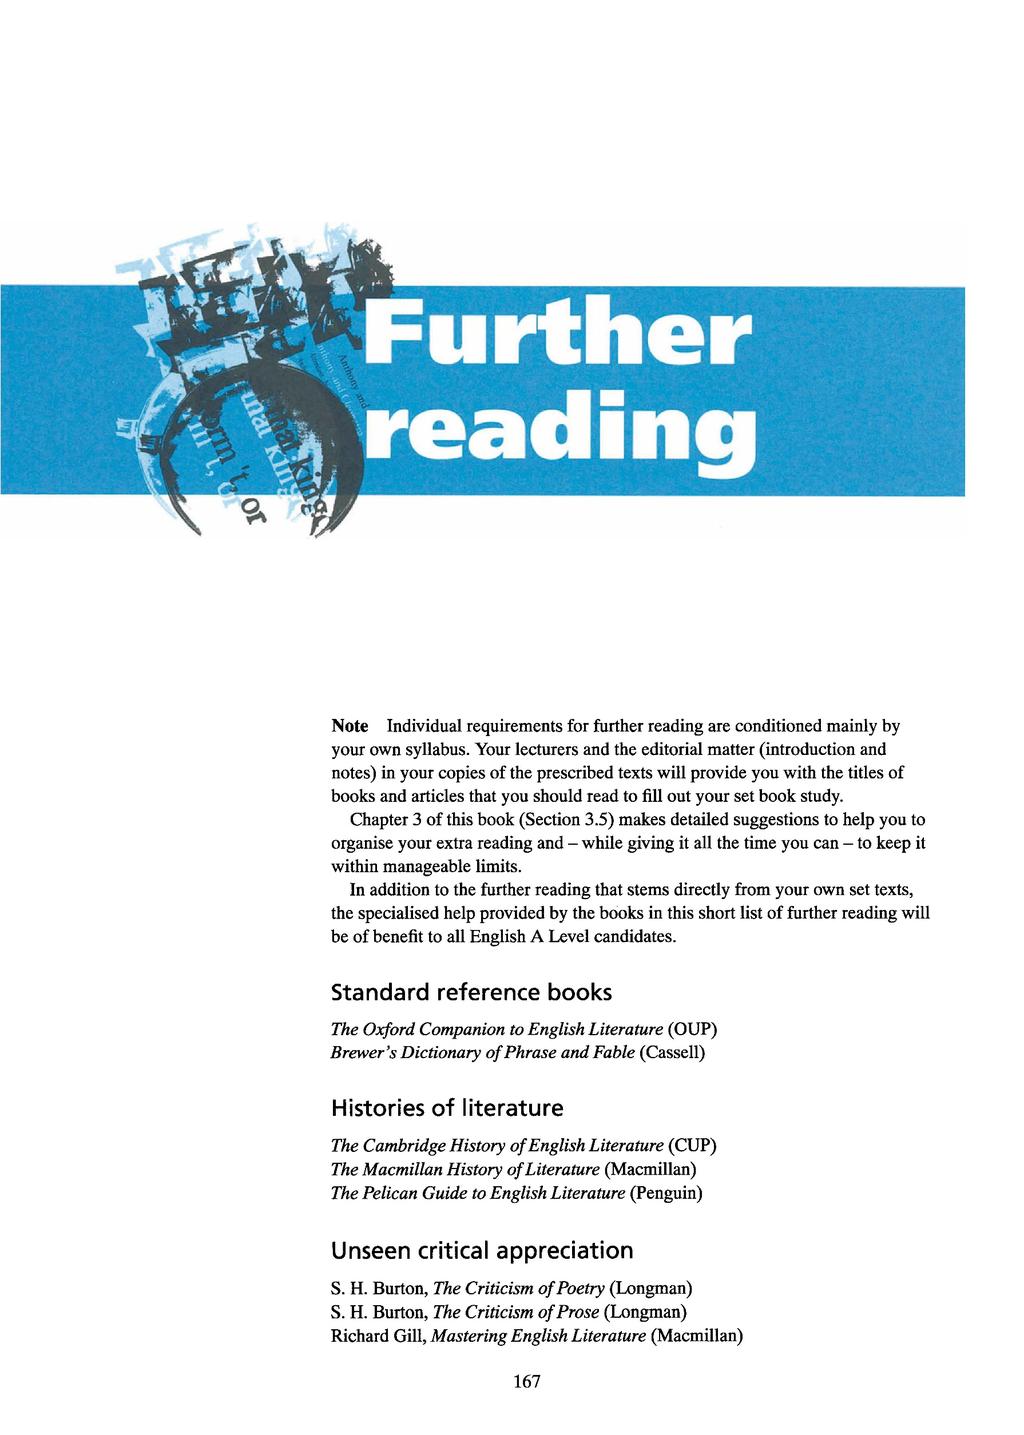 Note Individual requirements for further reading are conditioned mainly by your own syllabus.